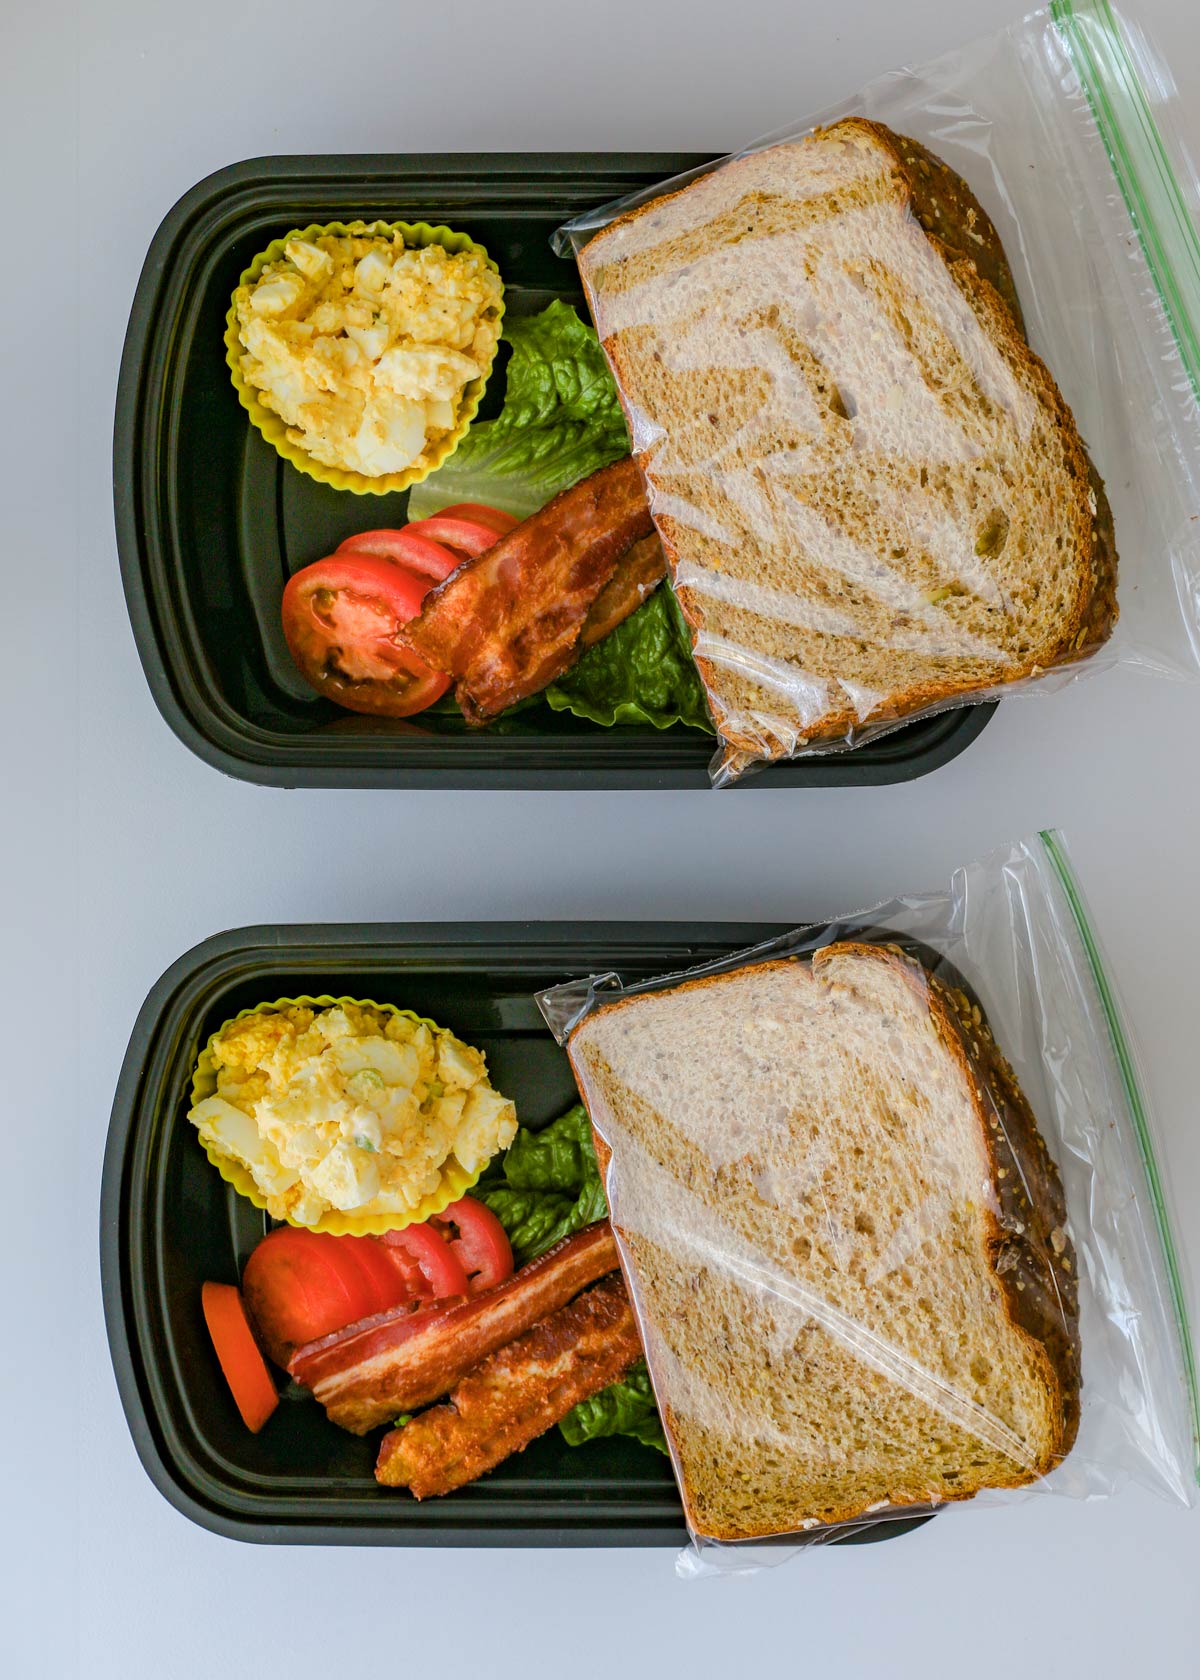 blt egg sandwiches prepped in meal prep boxes, with the bread in plastic bags.